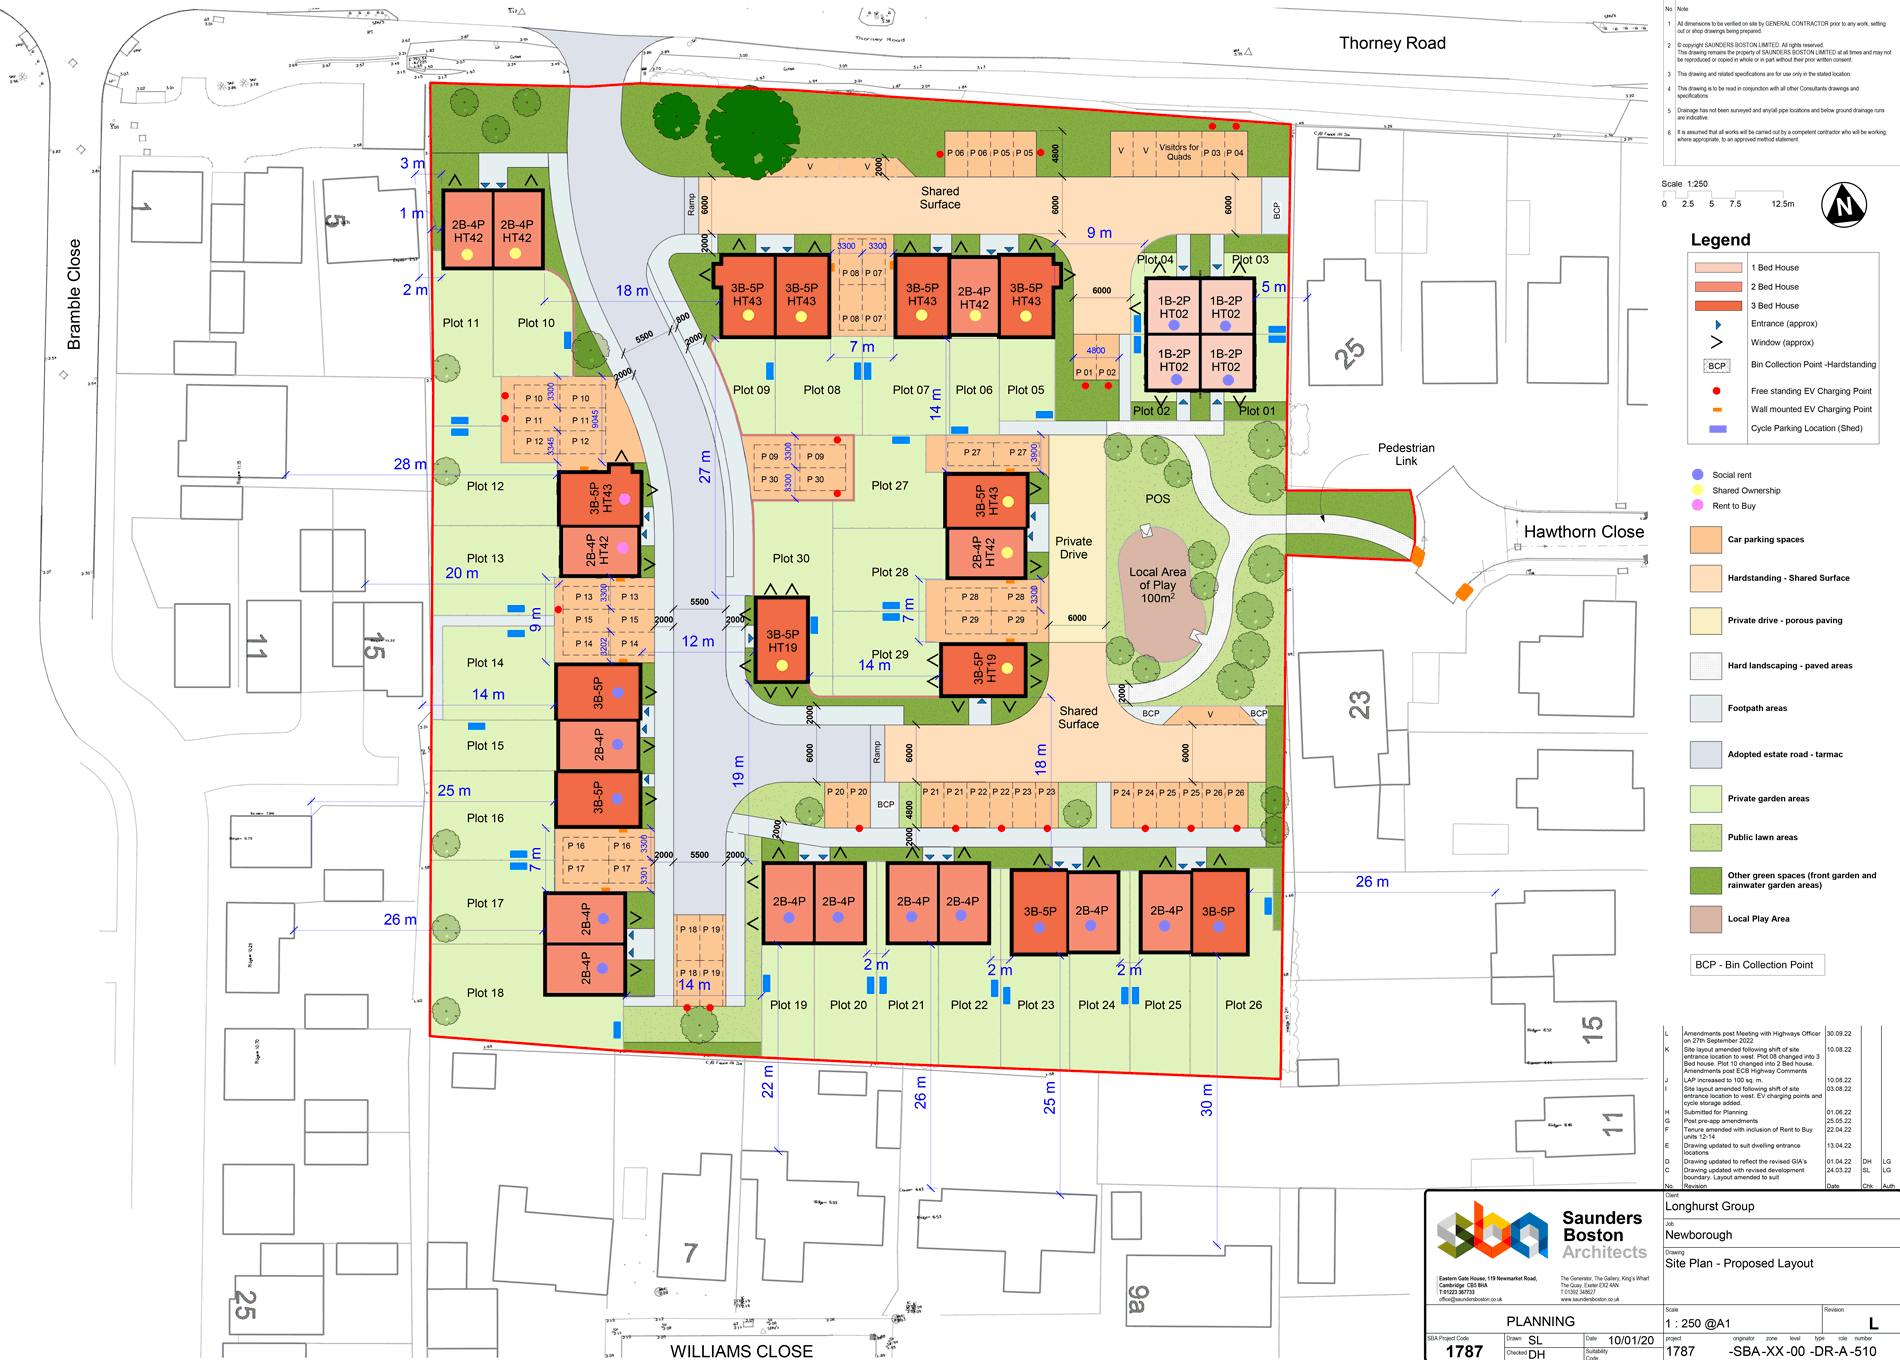 Technical illustration showing the housing area, with houses marked-in, tree areas and its connection to the area around it. Uses black lines and coloured keys